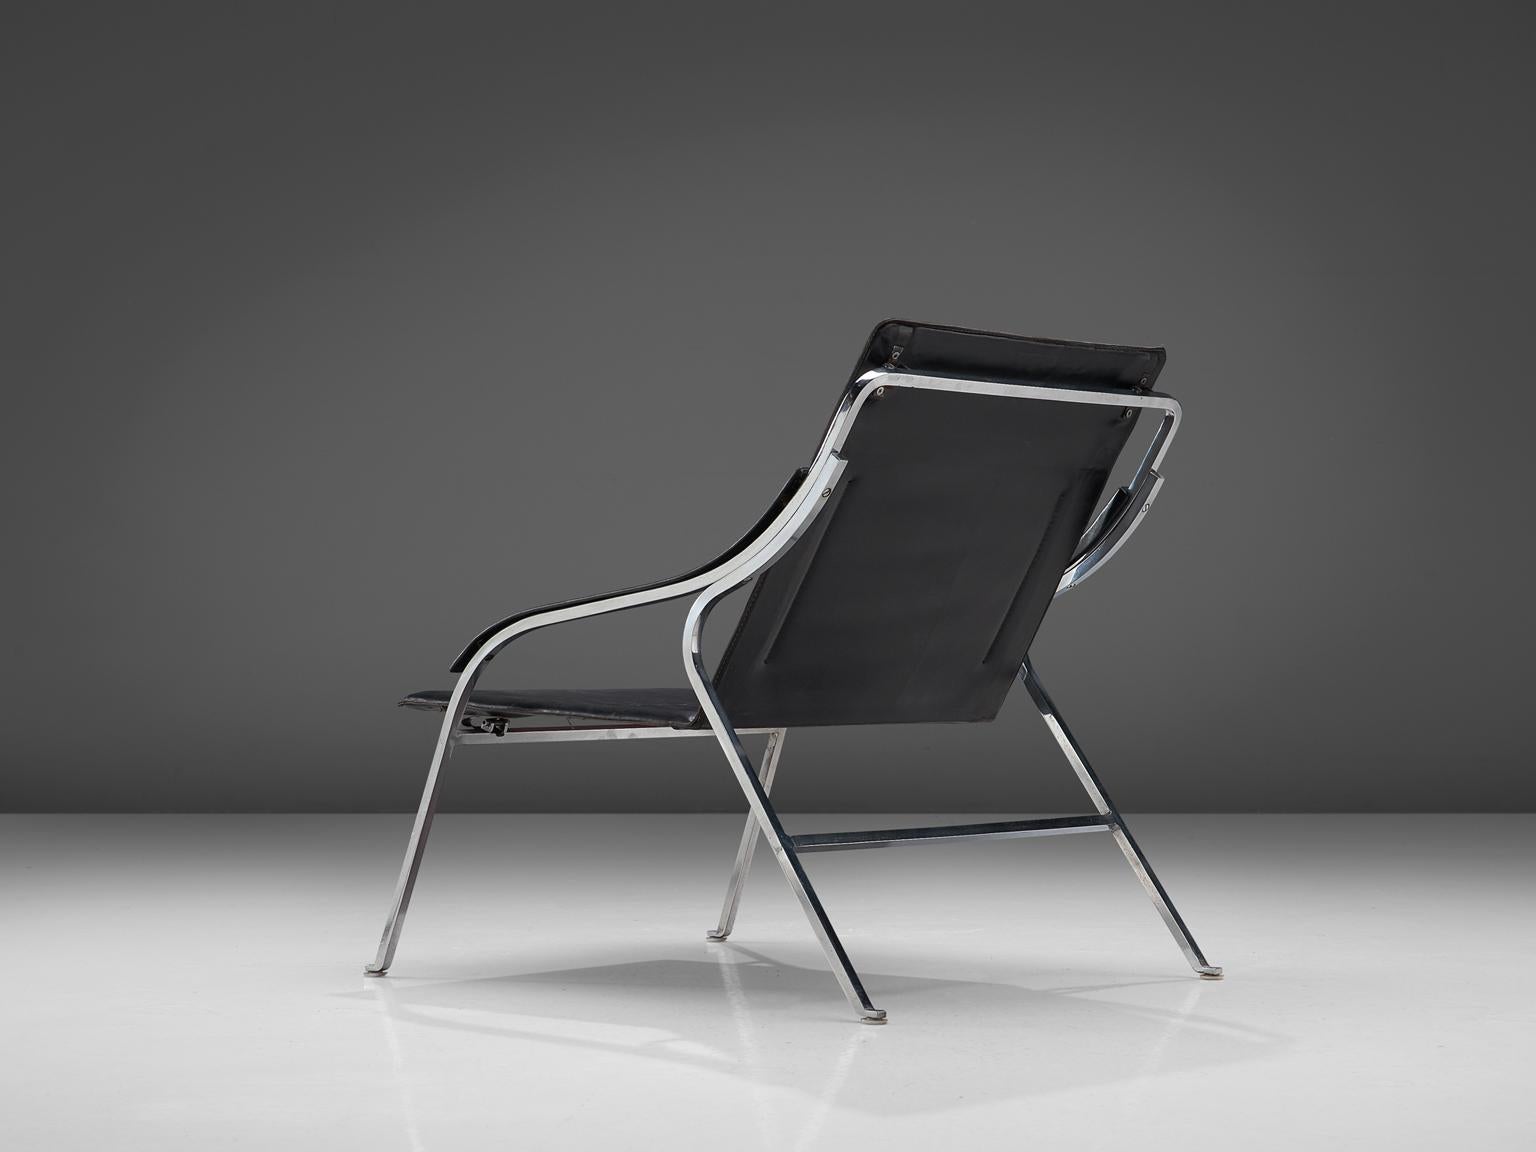 Marco Zanuso for Arflex, leather and chrome-plated steel, Italy, 1964.

This lounge chair by Zanuso remains among the best examples of armchairs designed by the architect. It is not only the ingenious slender design that distinguishes it, but also